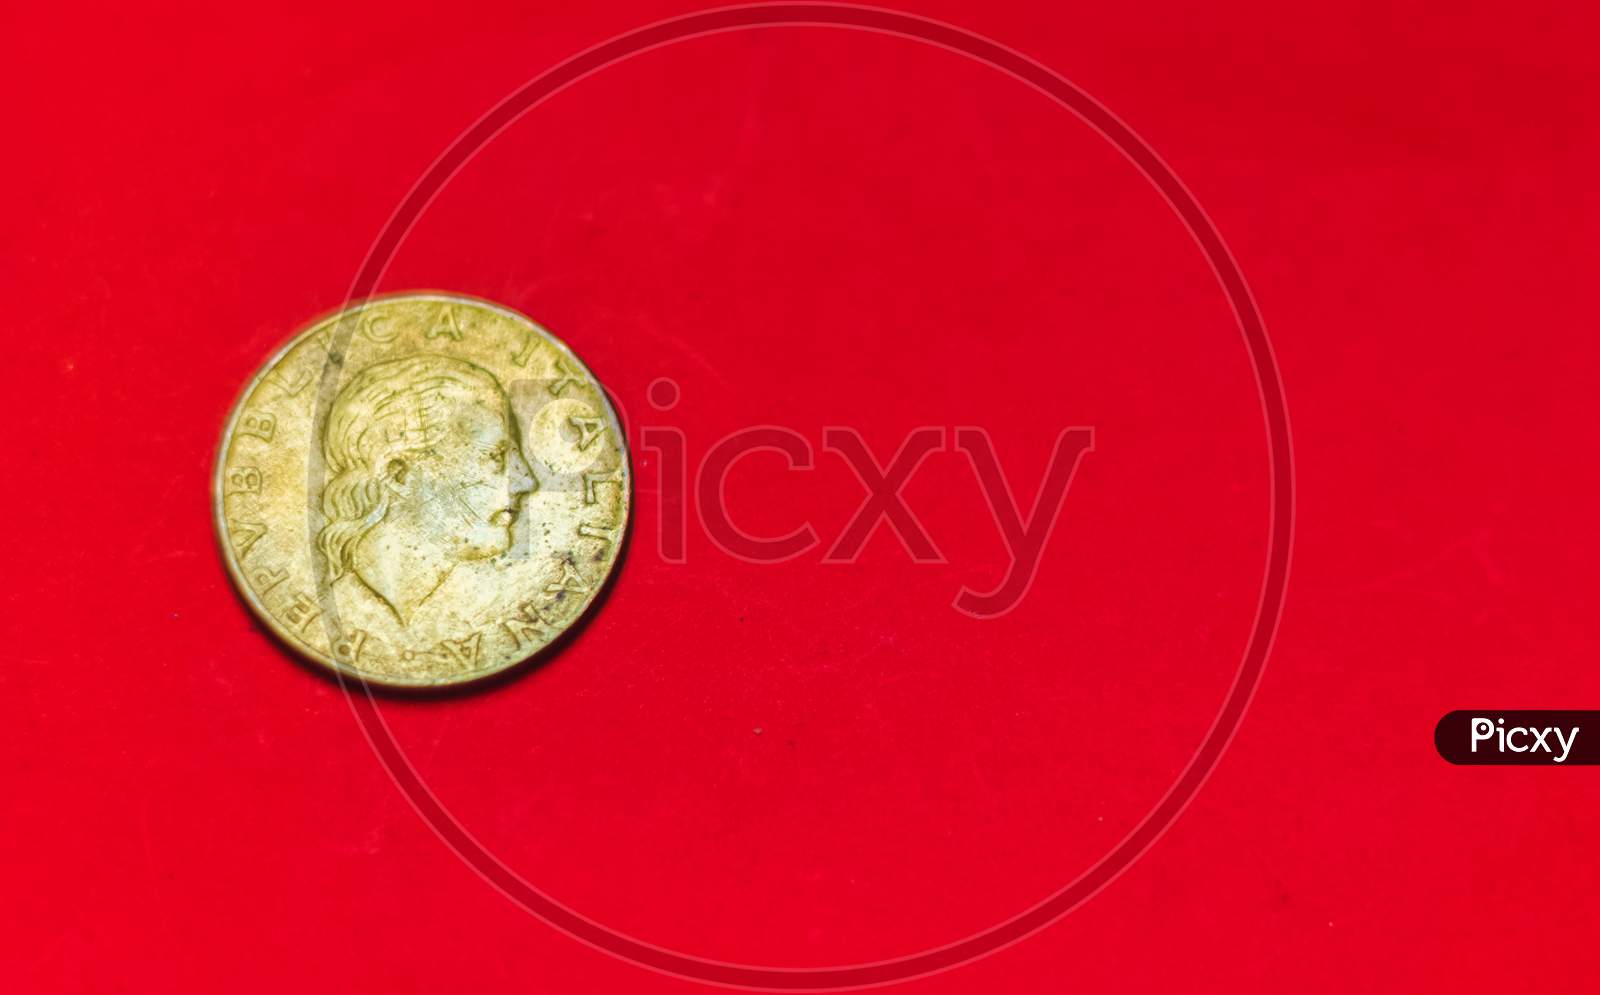 Italian 200 Lire Coin.Back Side Of Old Used Two Hundred Italian Lire, 1983. Vintage Bronze Coin Isolated On Red Background With Space For Text Copy. Repvbblica Italiana 200